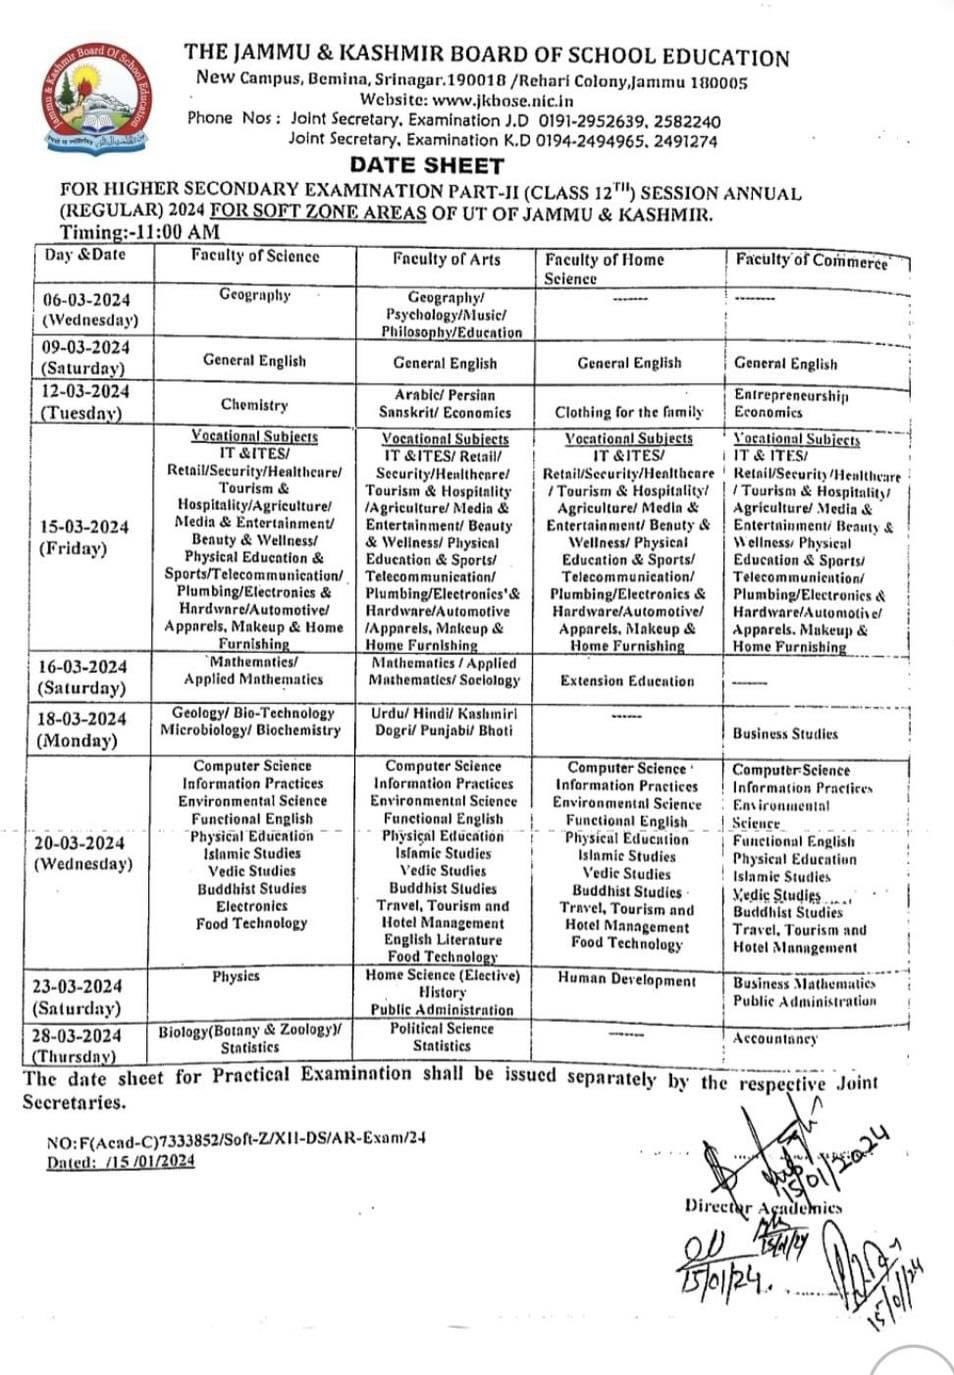 JKBOSE Class 12th Date Sheet Released Download Now.